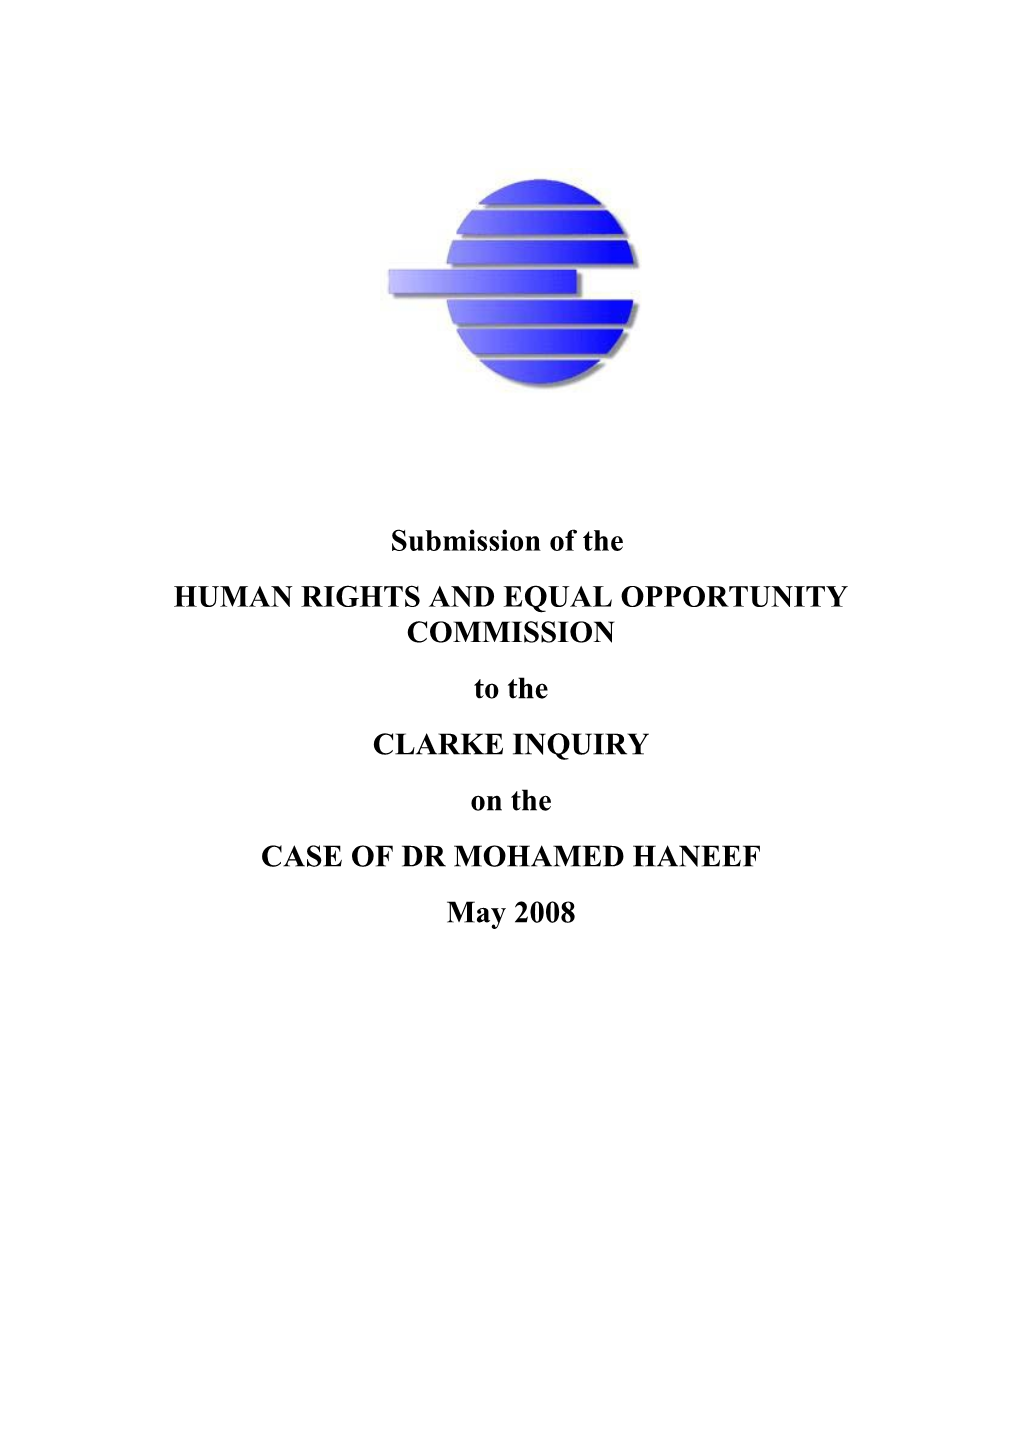 Human Rights and Equal Opportunity Commission